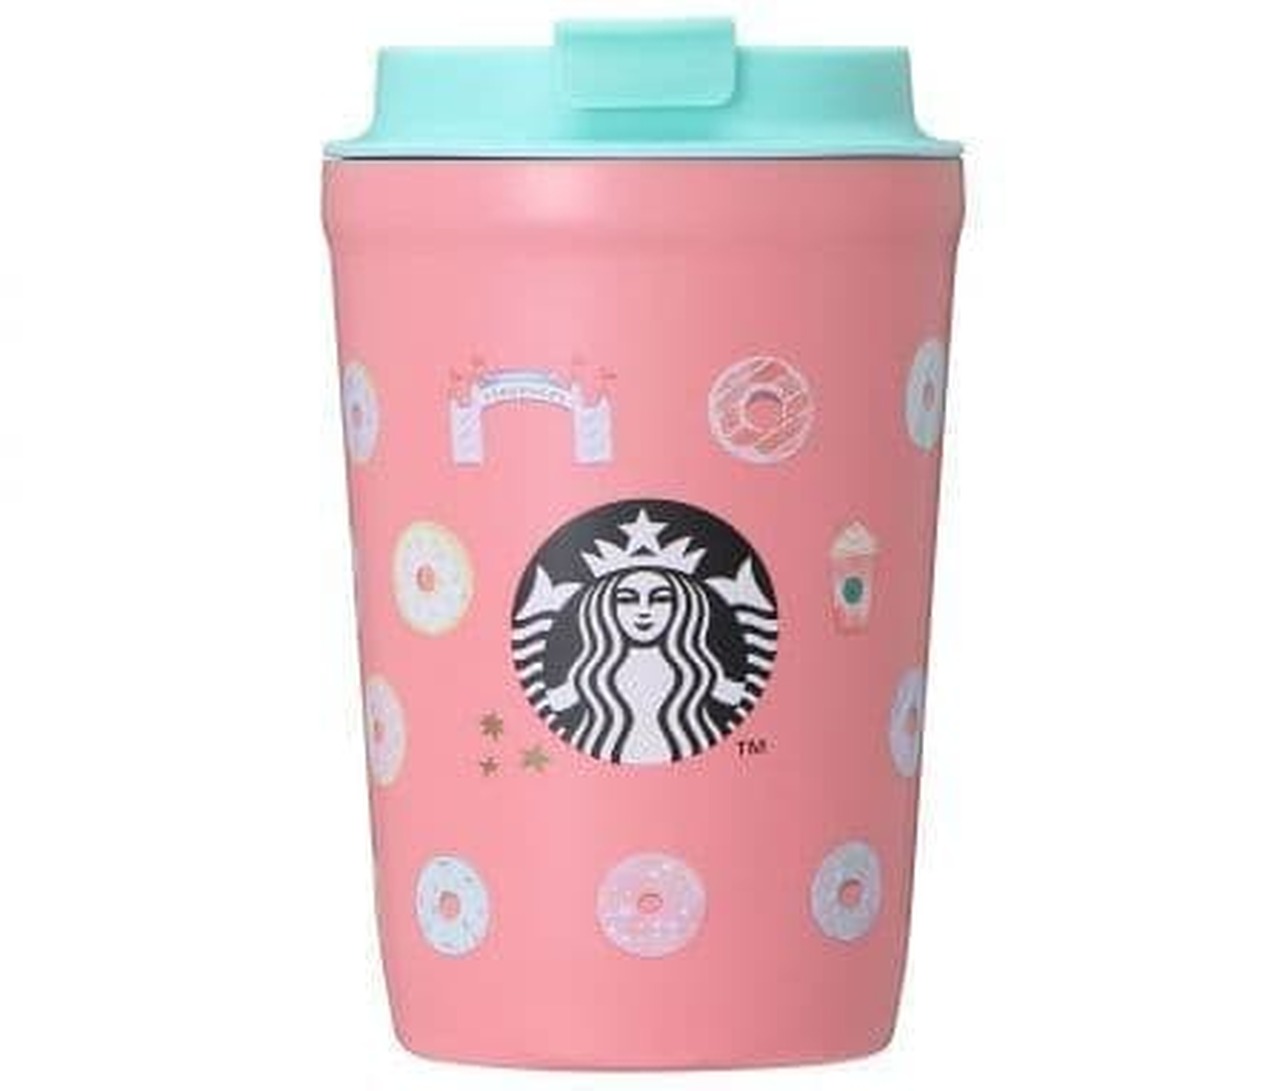 Starbucks "Stainless Steel Tumbler Colorful Donuts 355ml"